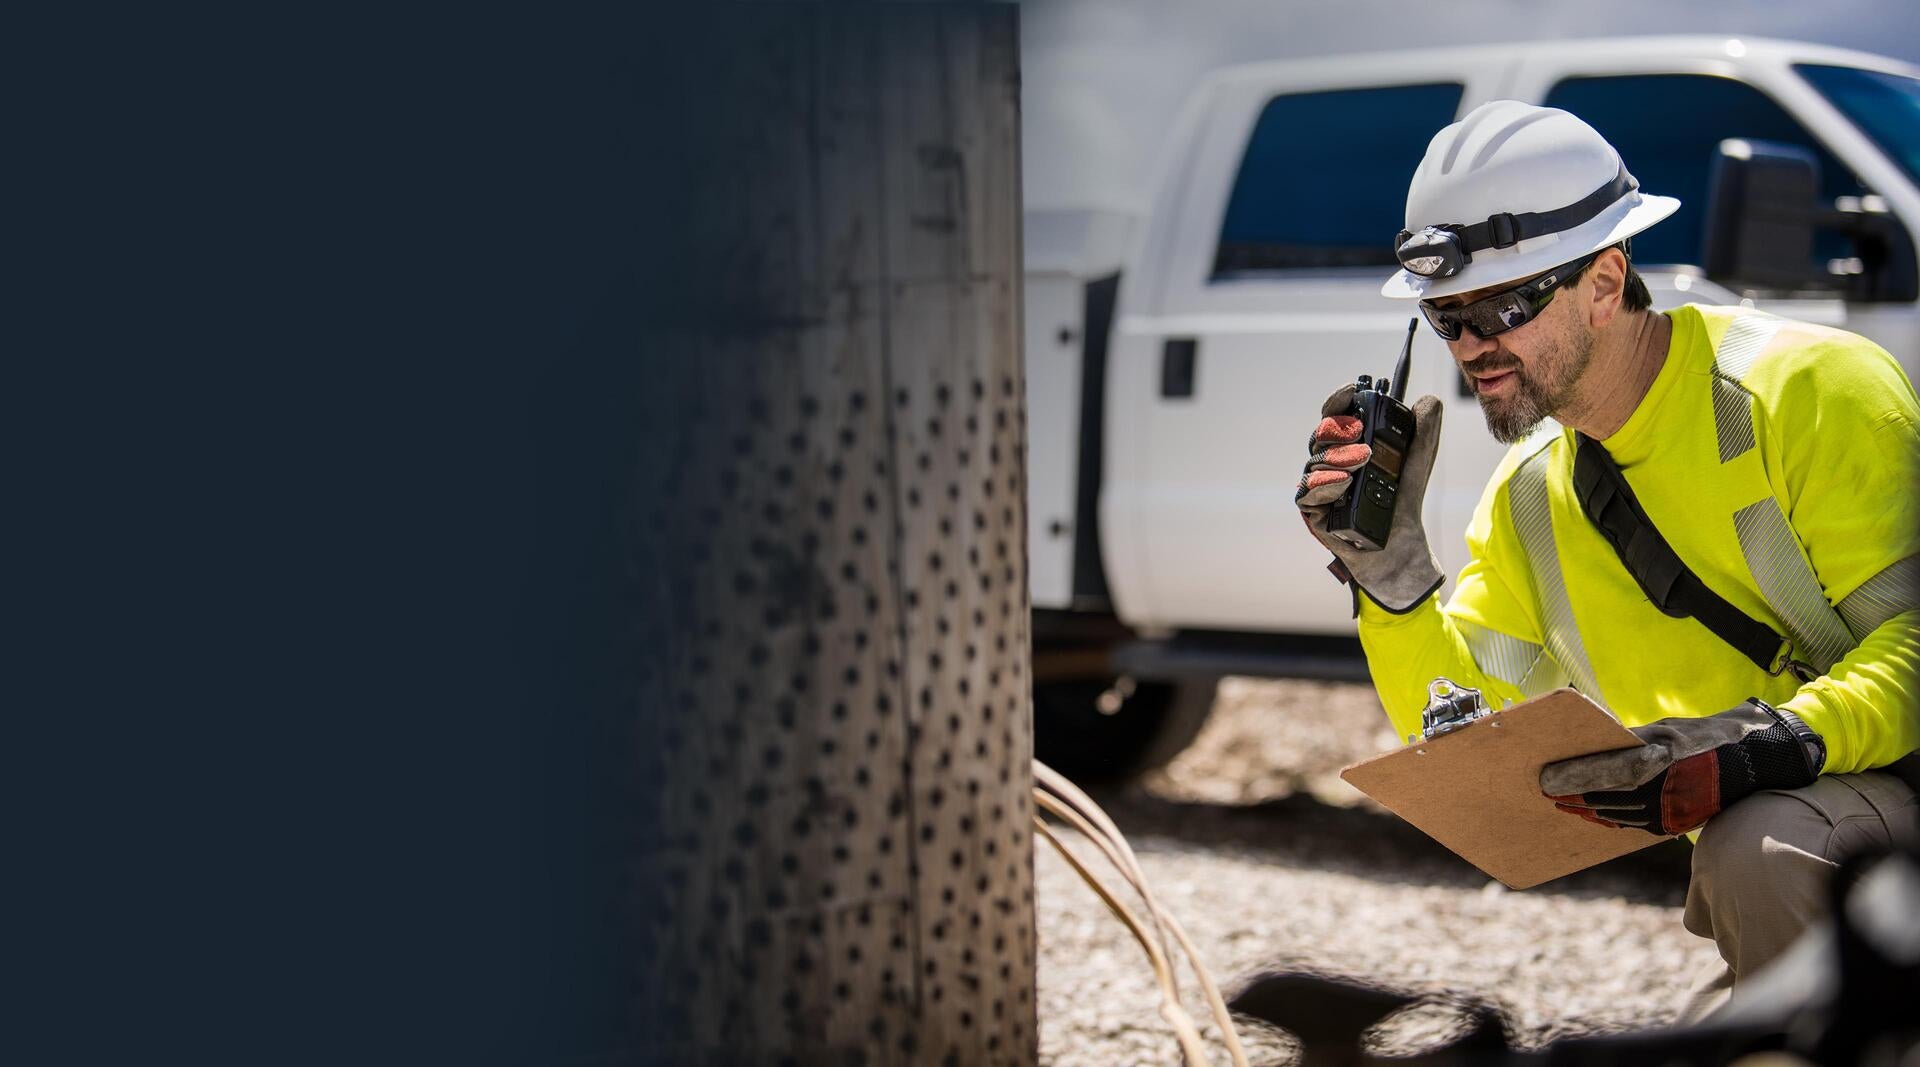 Utility worker with portable radio